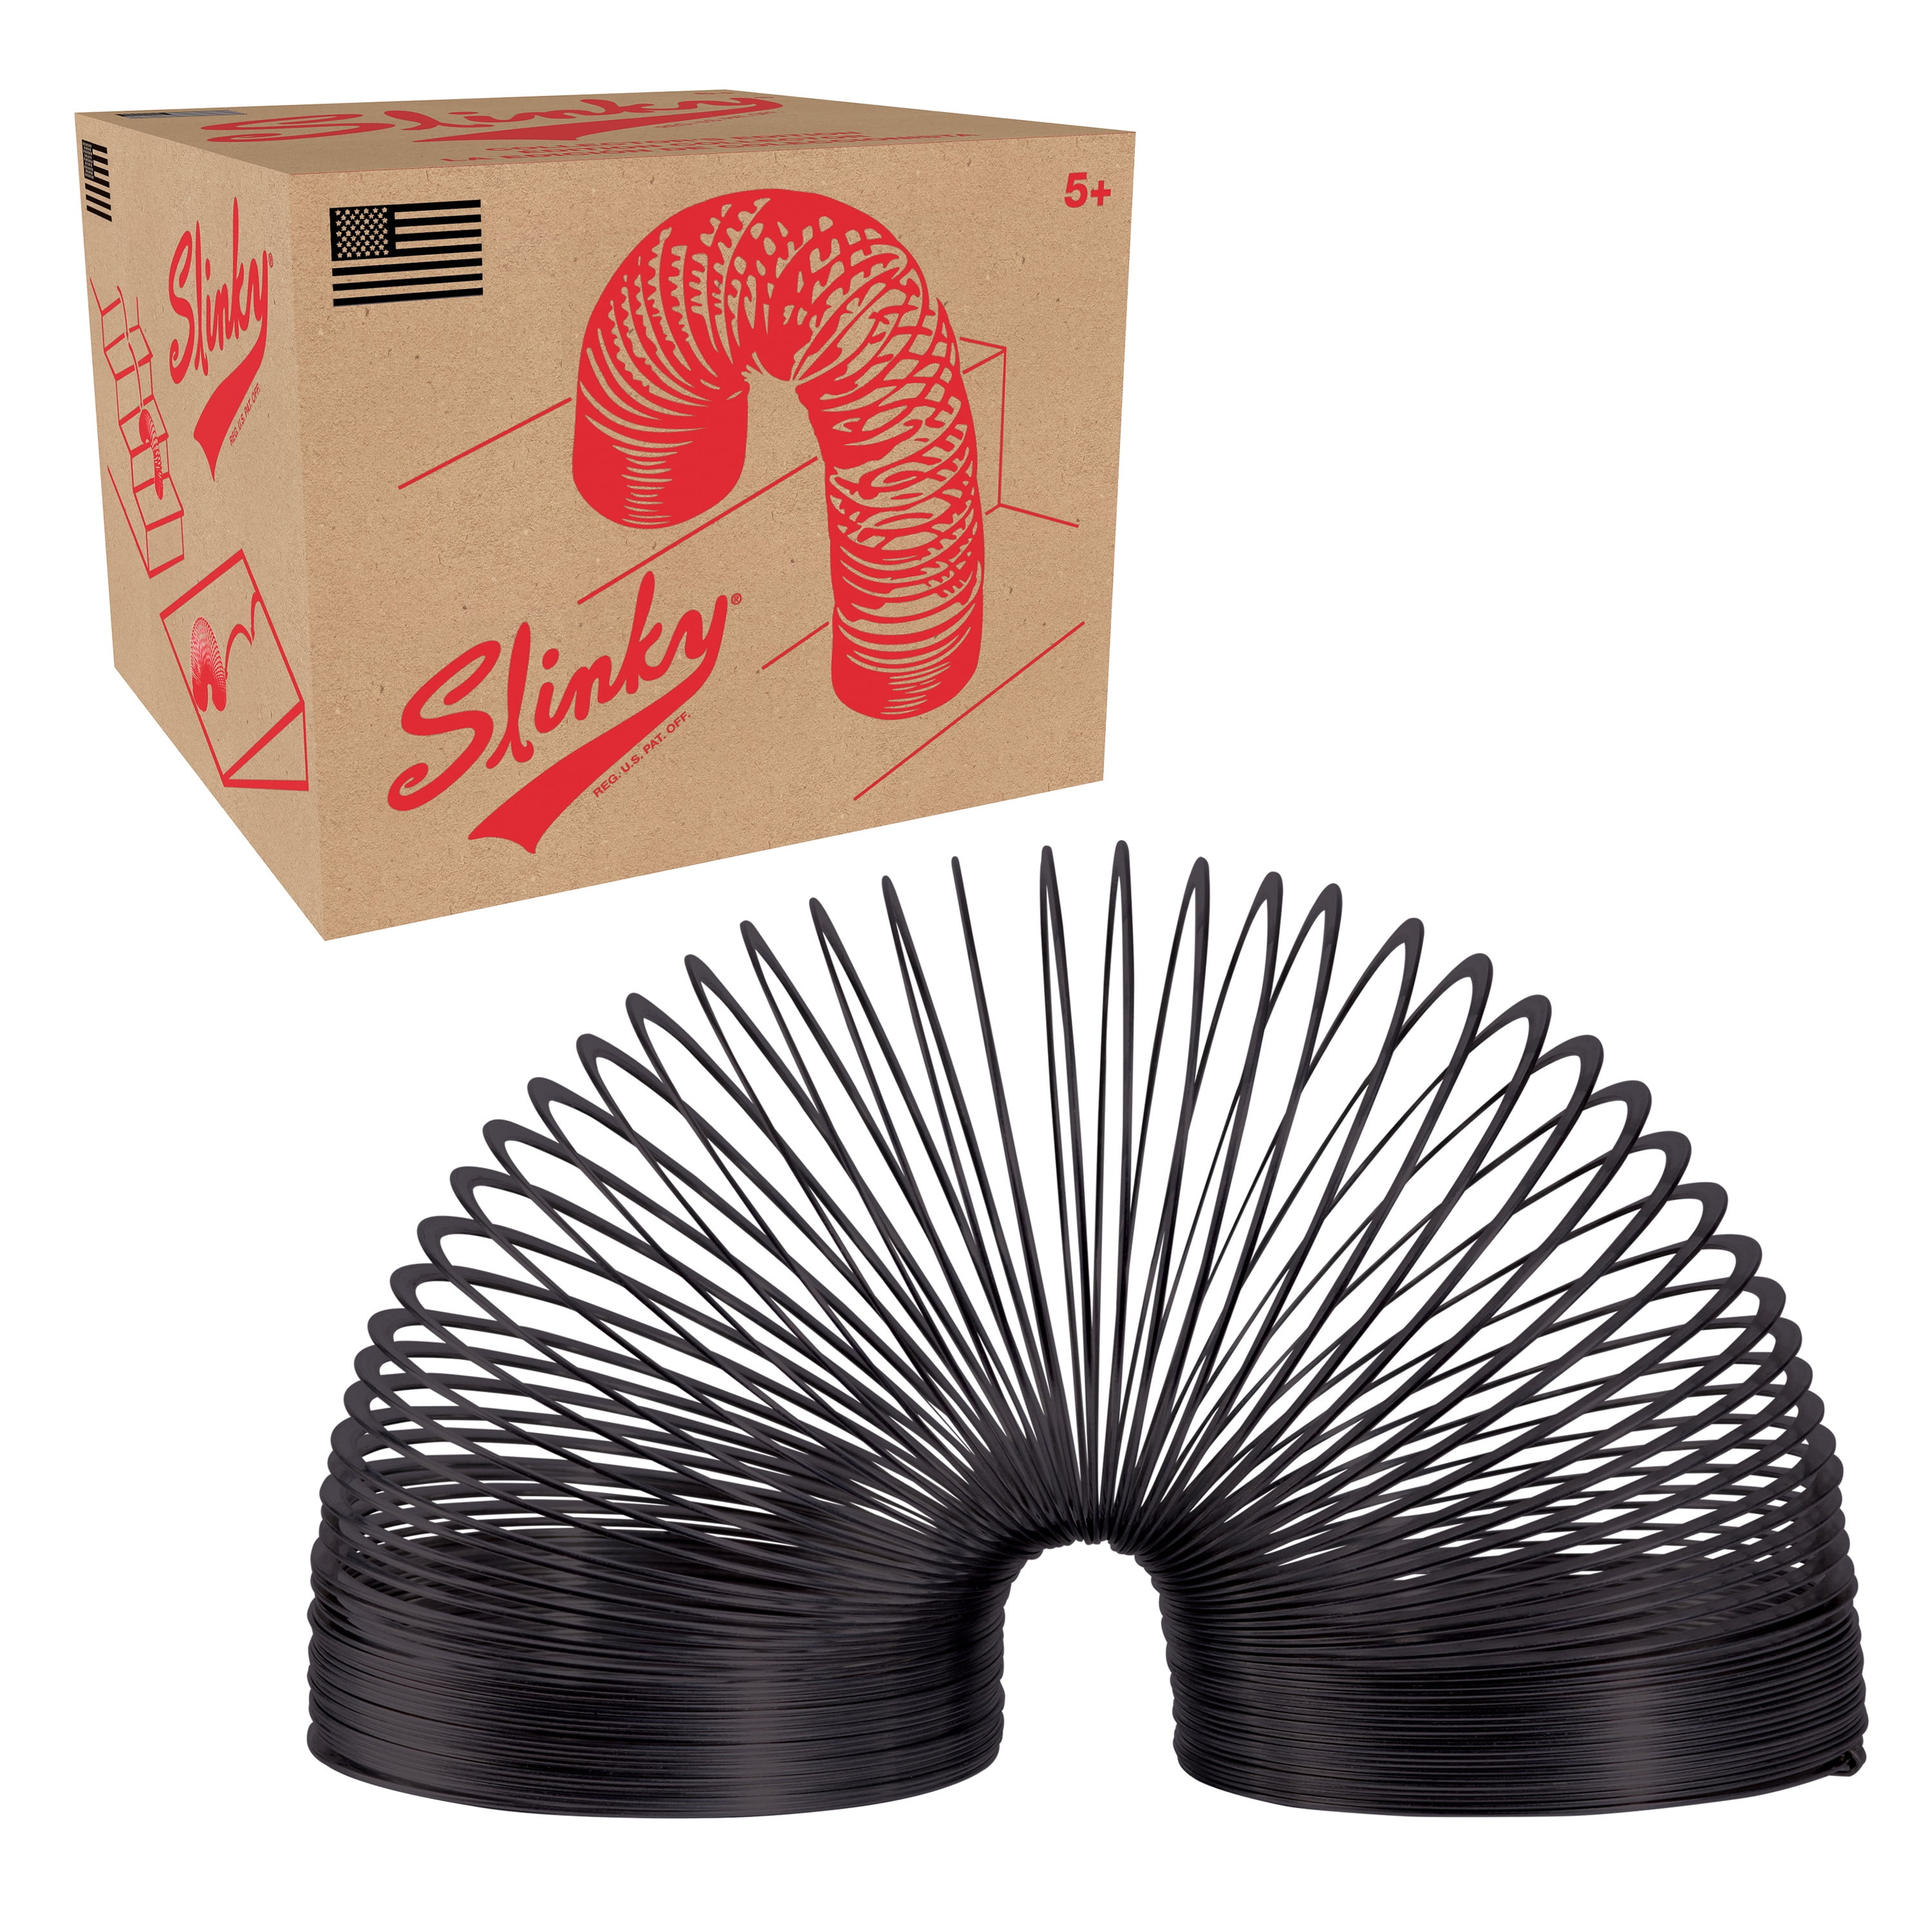 Details about   The Original Giant Slinky Walking Spring Toy Big Metal Slinky for Ages 5+ 